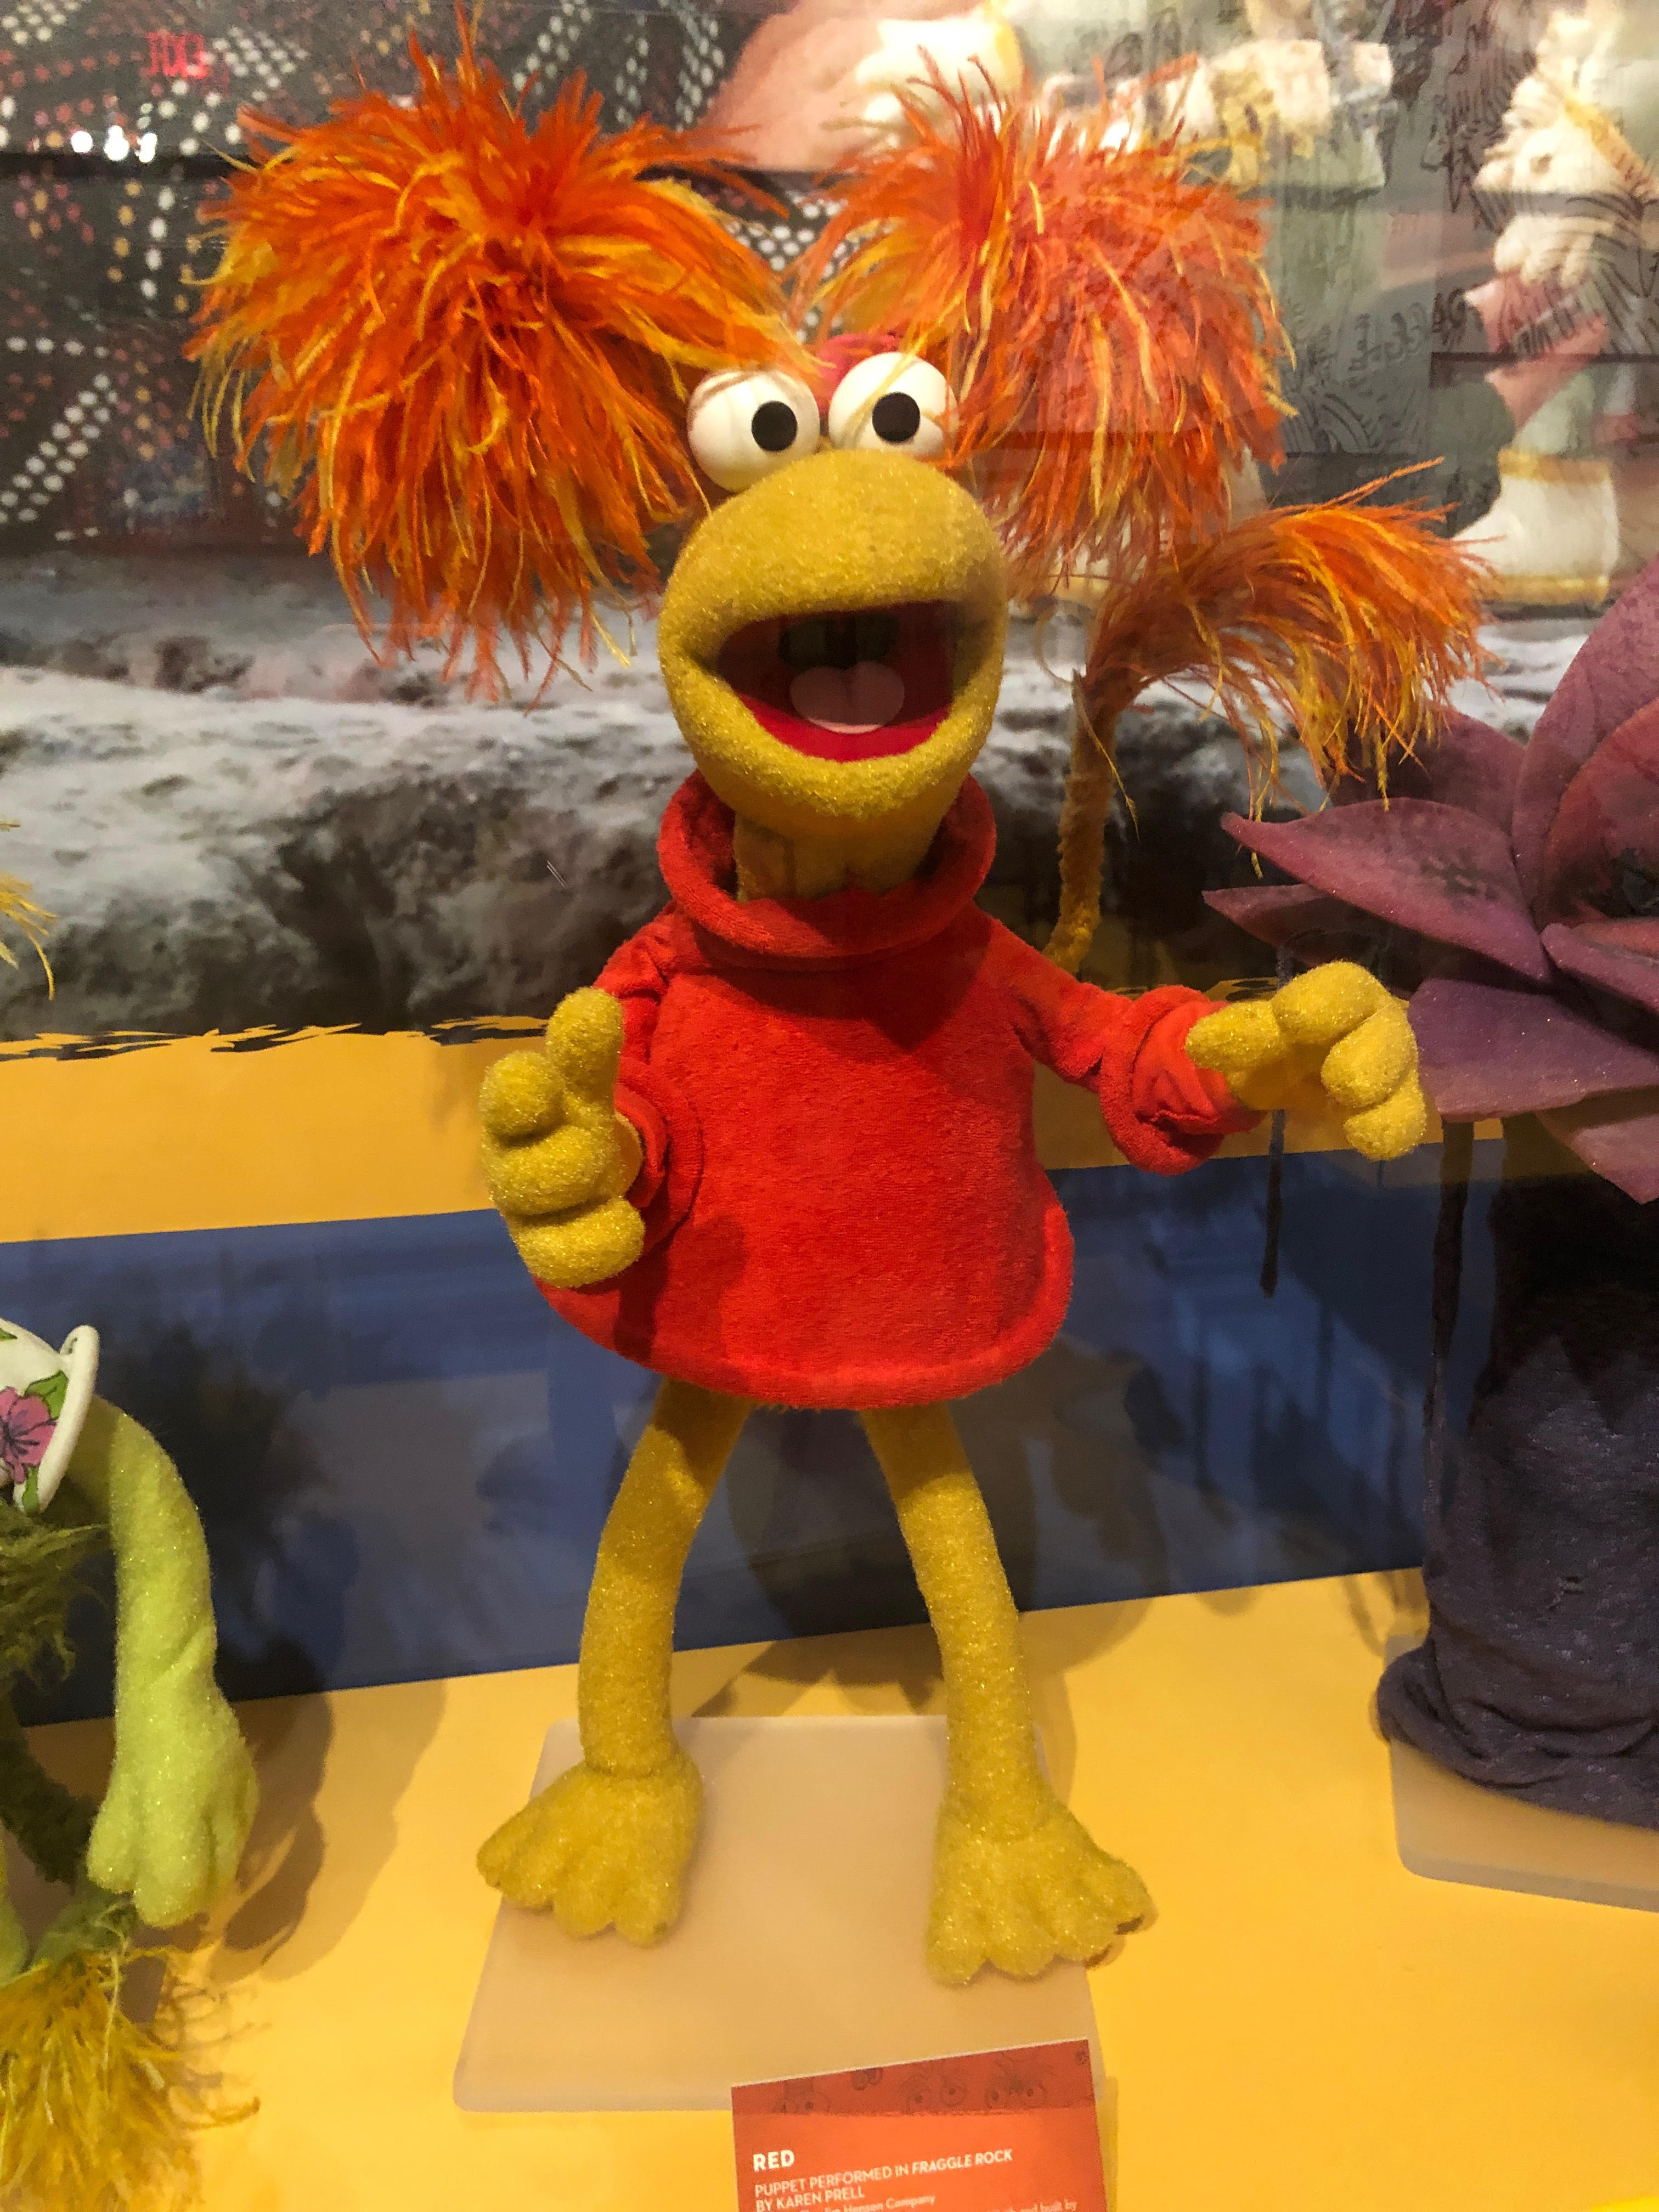 Red Fraggle display at the Worlds of Puppetry Museum